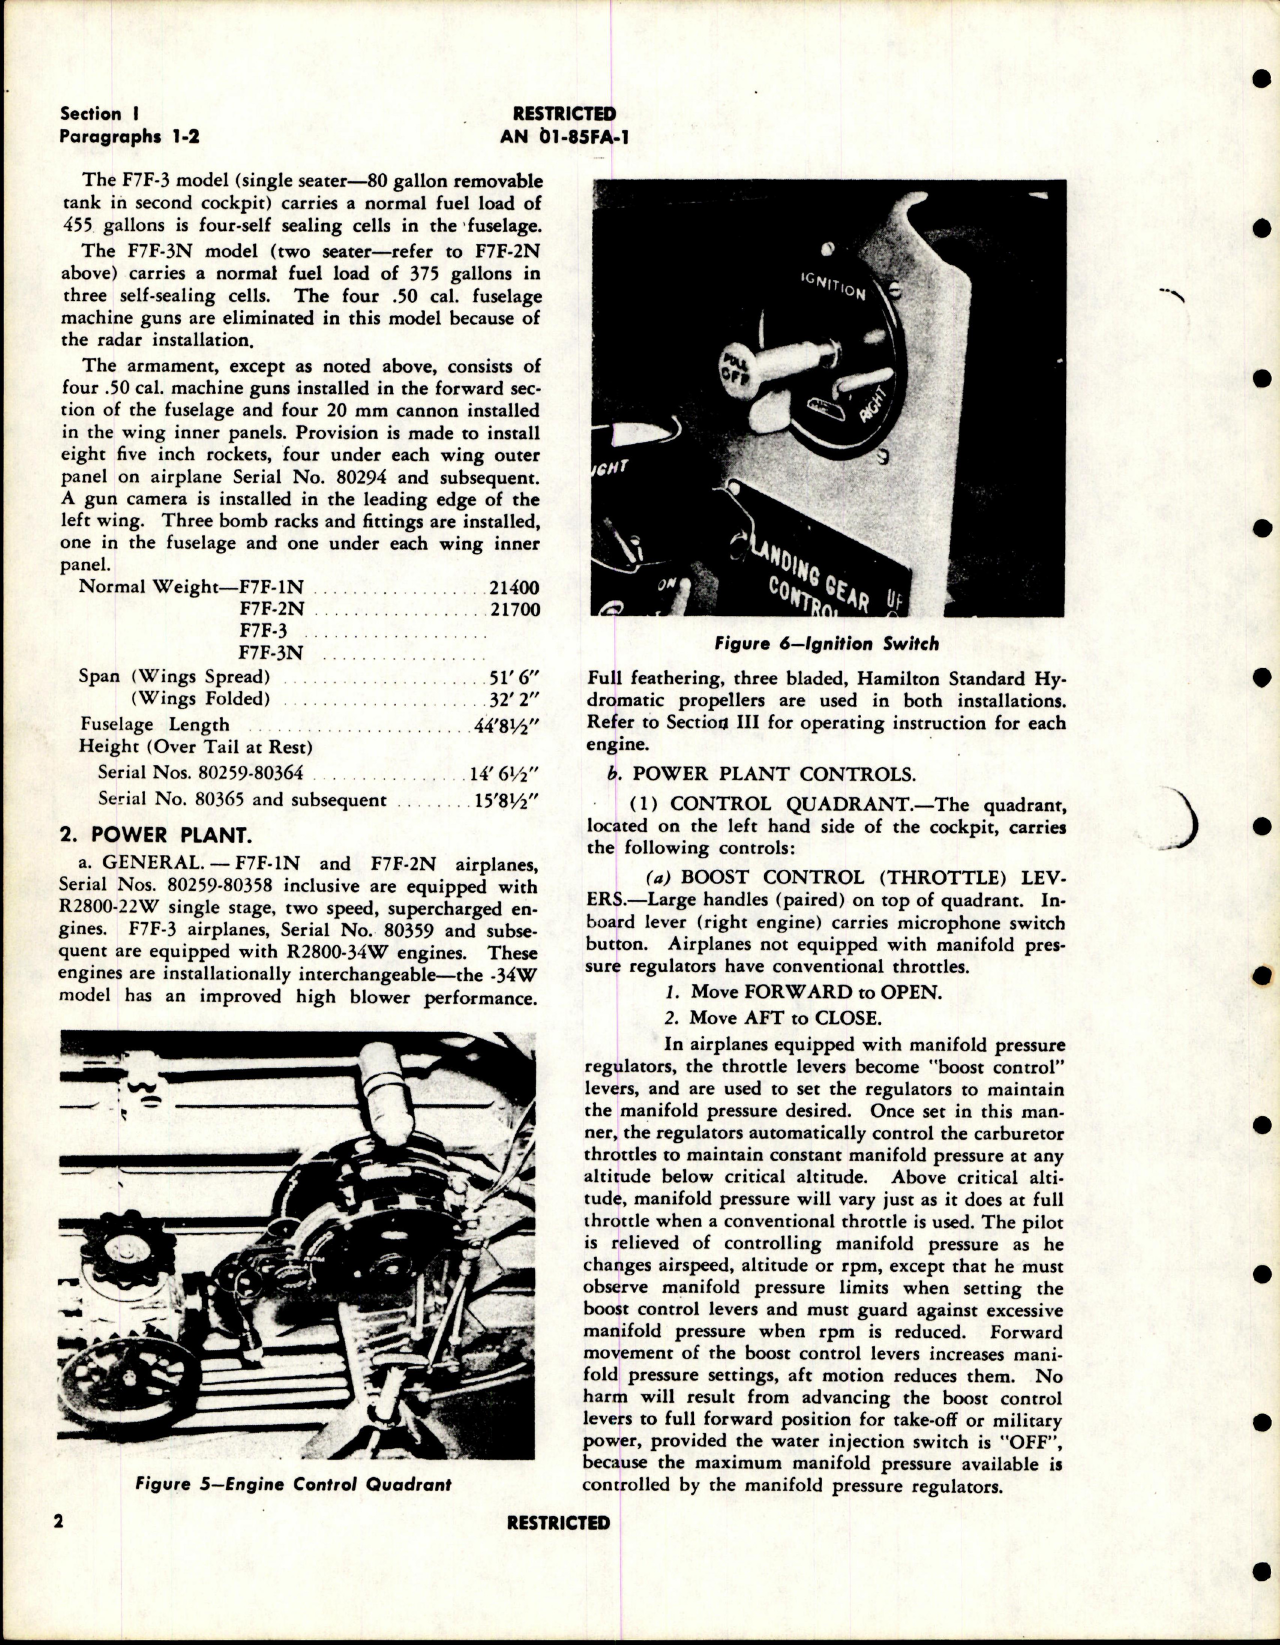 Sample page 8 from AirCorps Library document: Pilot's Handbook for F7F-1N, F7F-2N, F7F-3, and F7F-3N